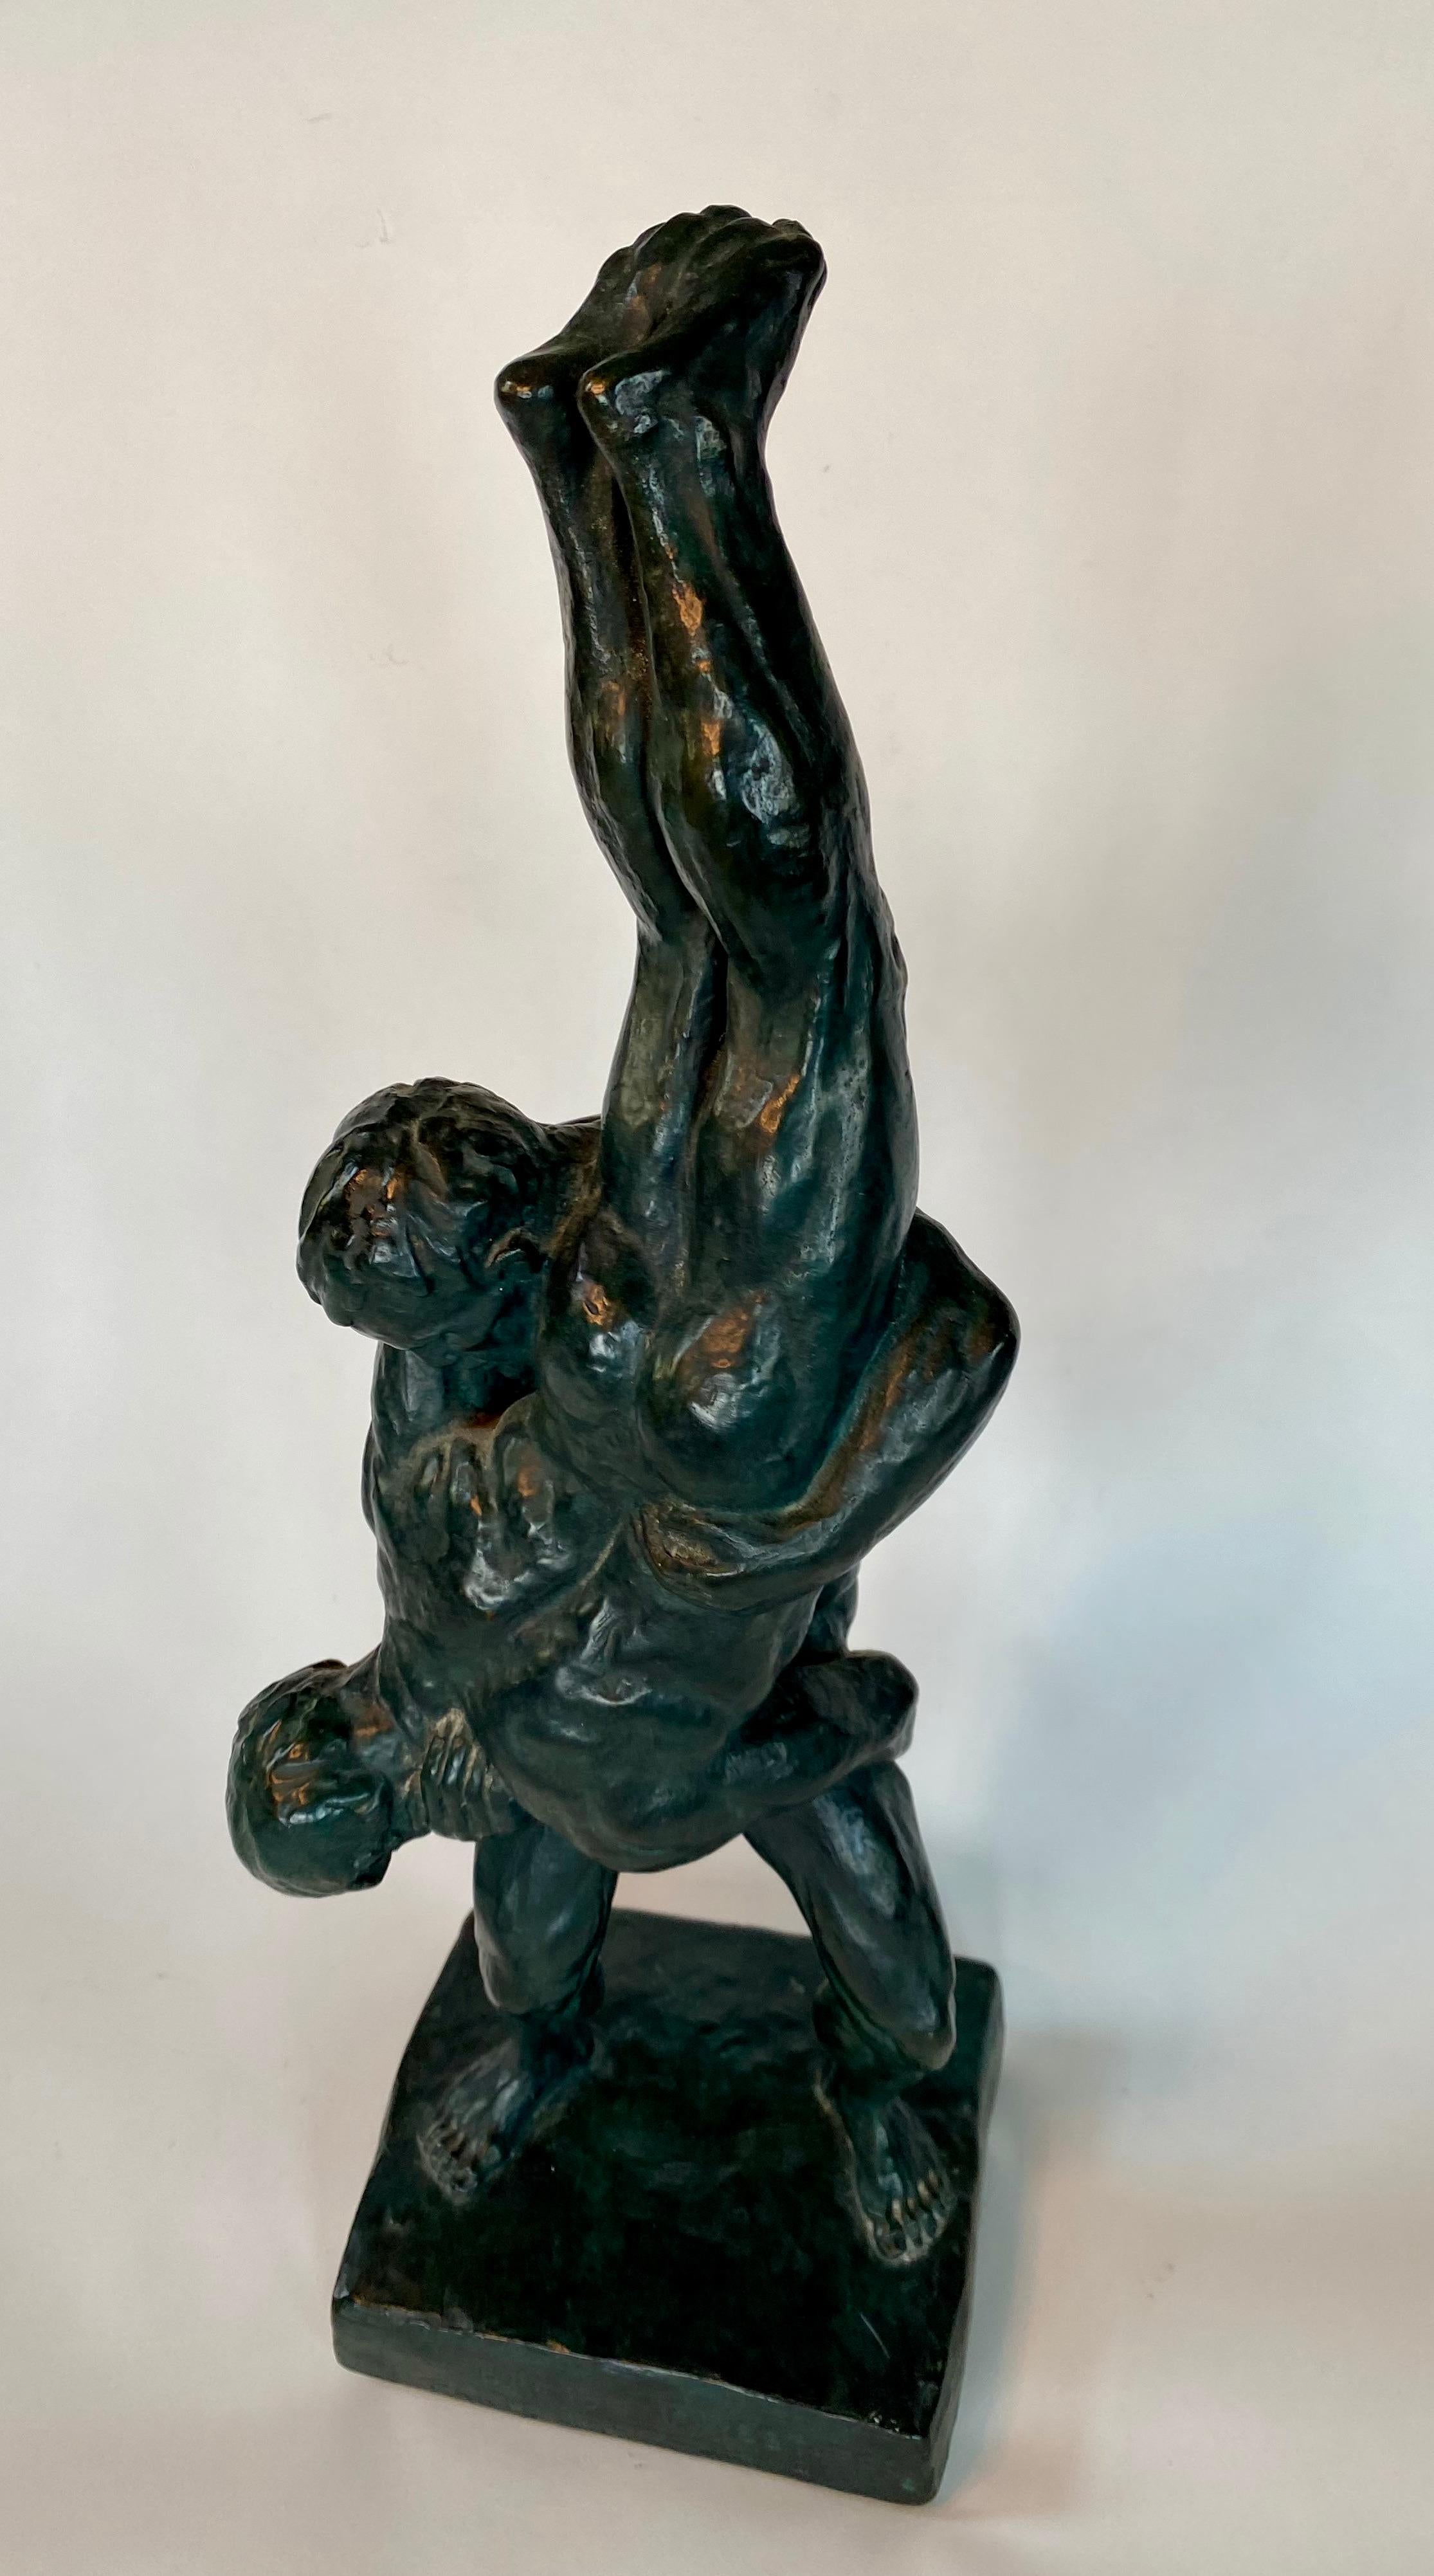 Breton Wrestlers Bronze Figurative Modern Male Sculpture Female Artist LGBT '29 WPA

Malvina Hoffman (American, 1885 - 1966) BRETON WRESTLERS, 20 inches, bronze, Weight: Approximatelly 20 lbs. Signed and titled BRETON WRESTLERS, PARIS, 1929.

The